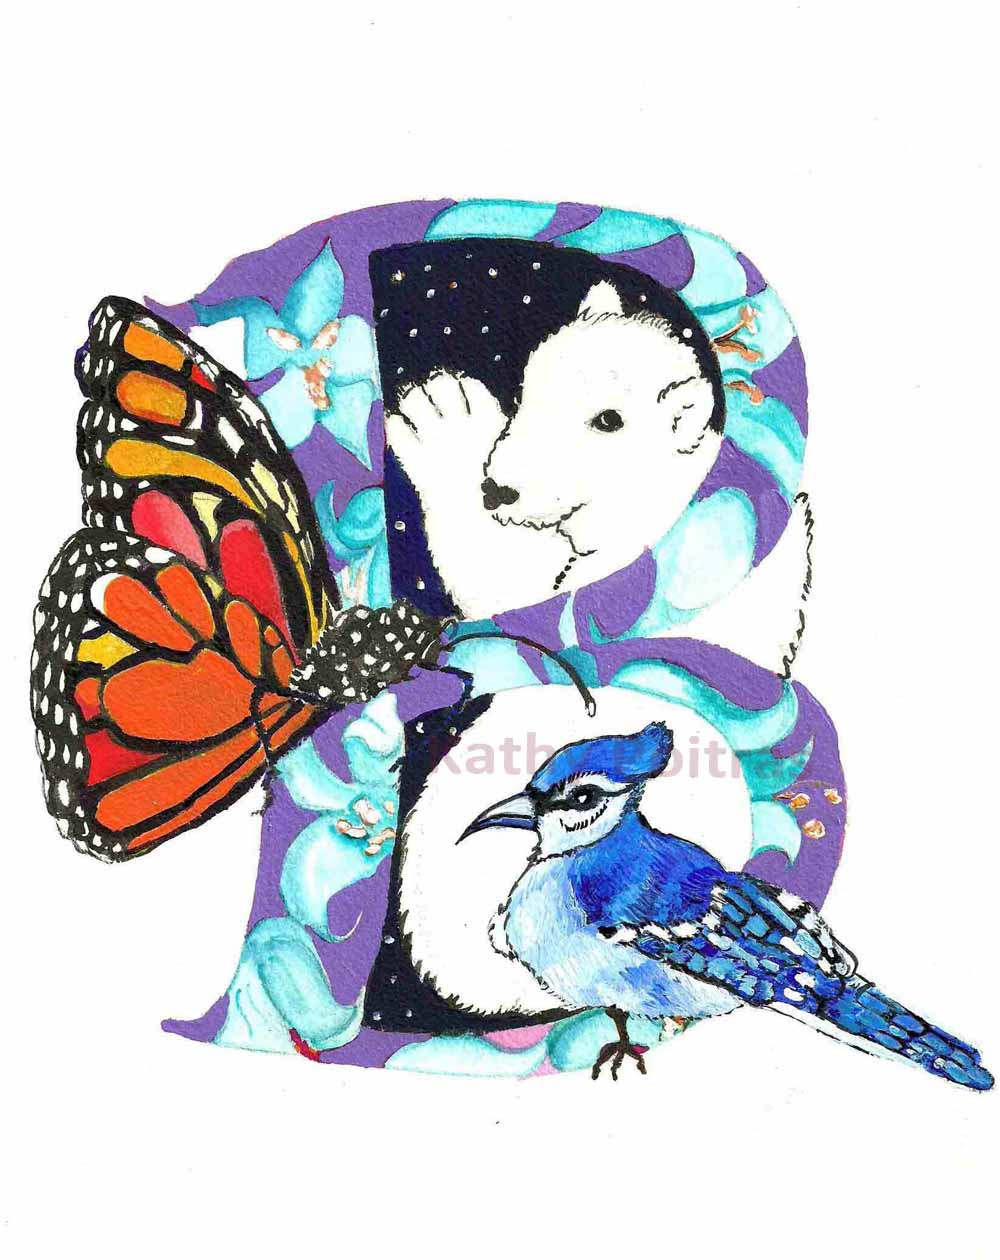 Personalized Greeting Card. letter B, Butterfly, Bear and Blue Jay,